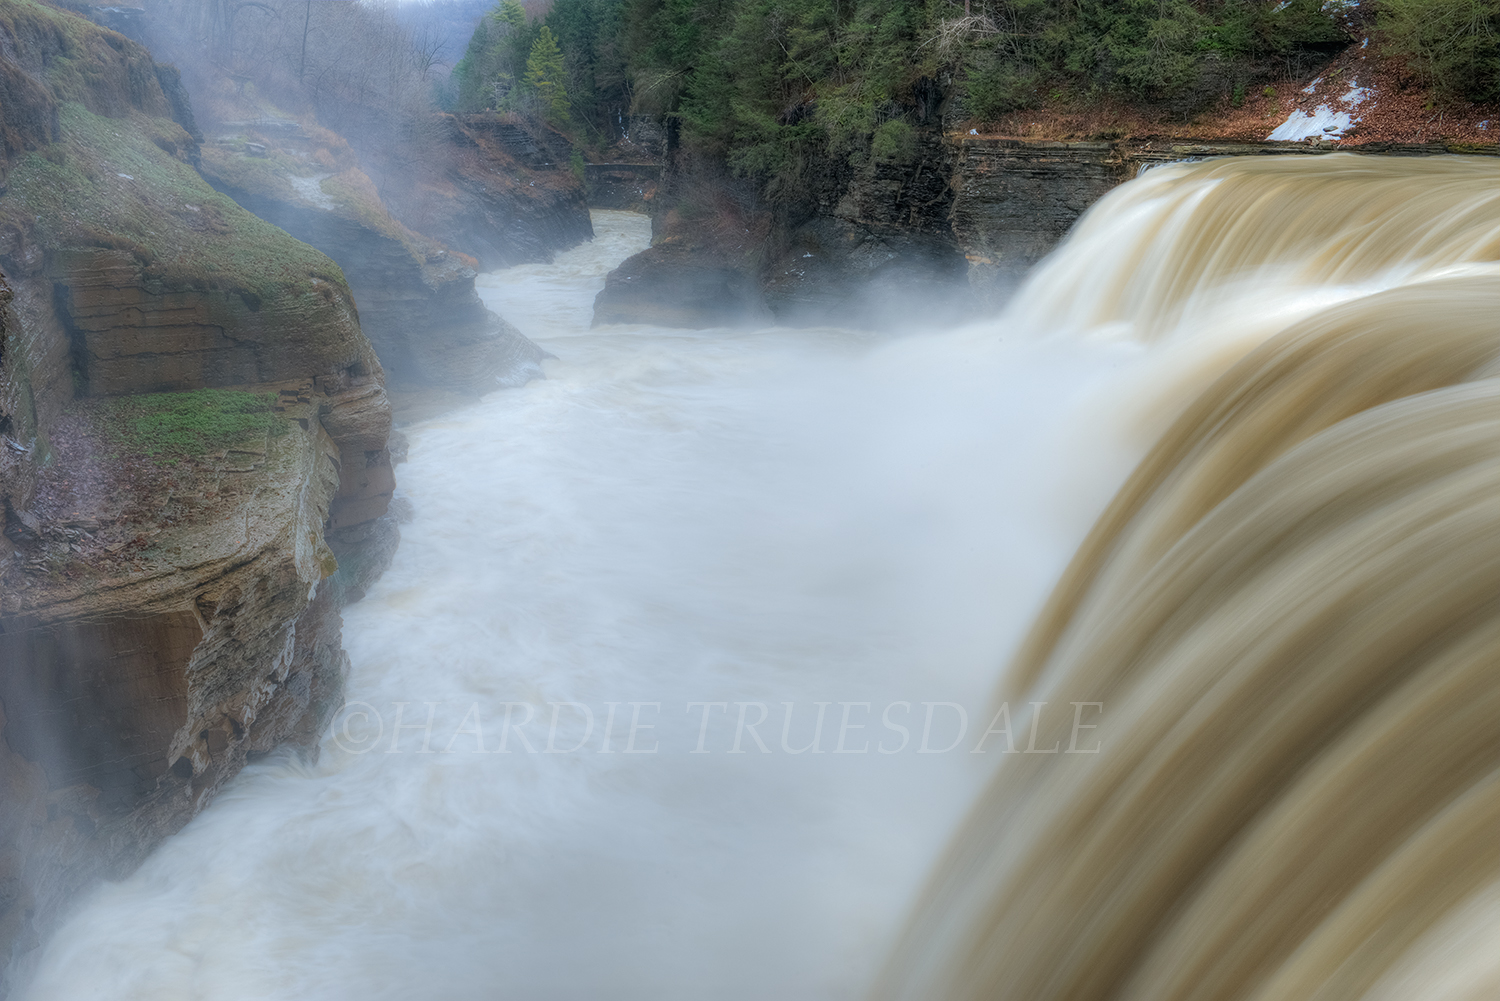 WNY#069 "Lower Falls, Genesee River, Letchworth State Park, NY"